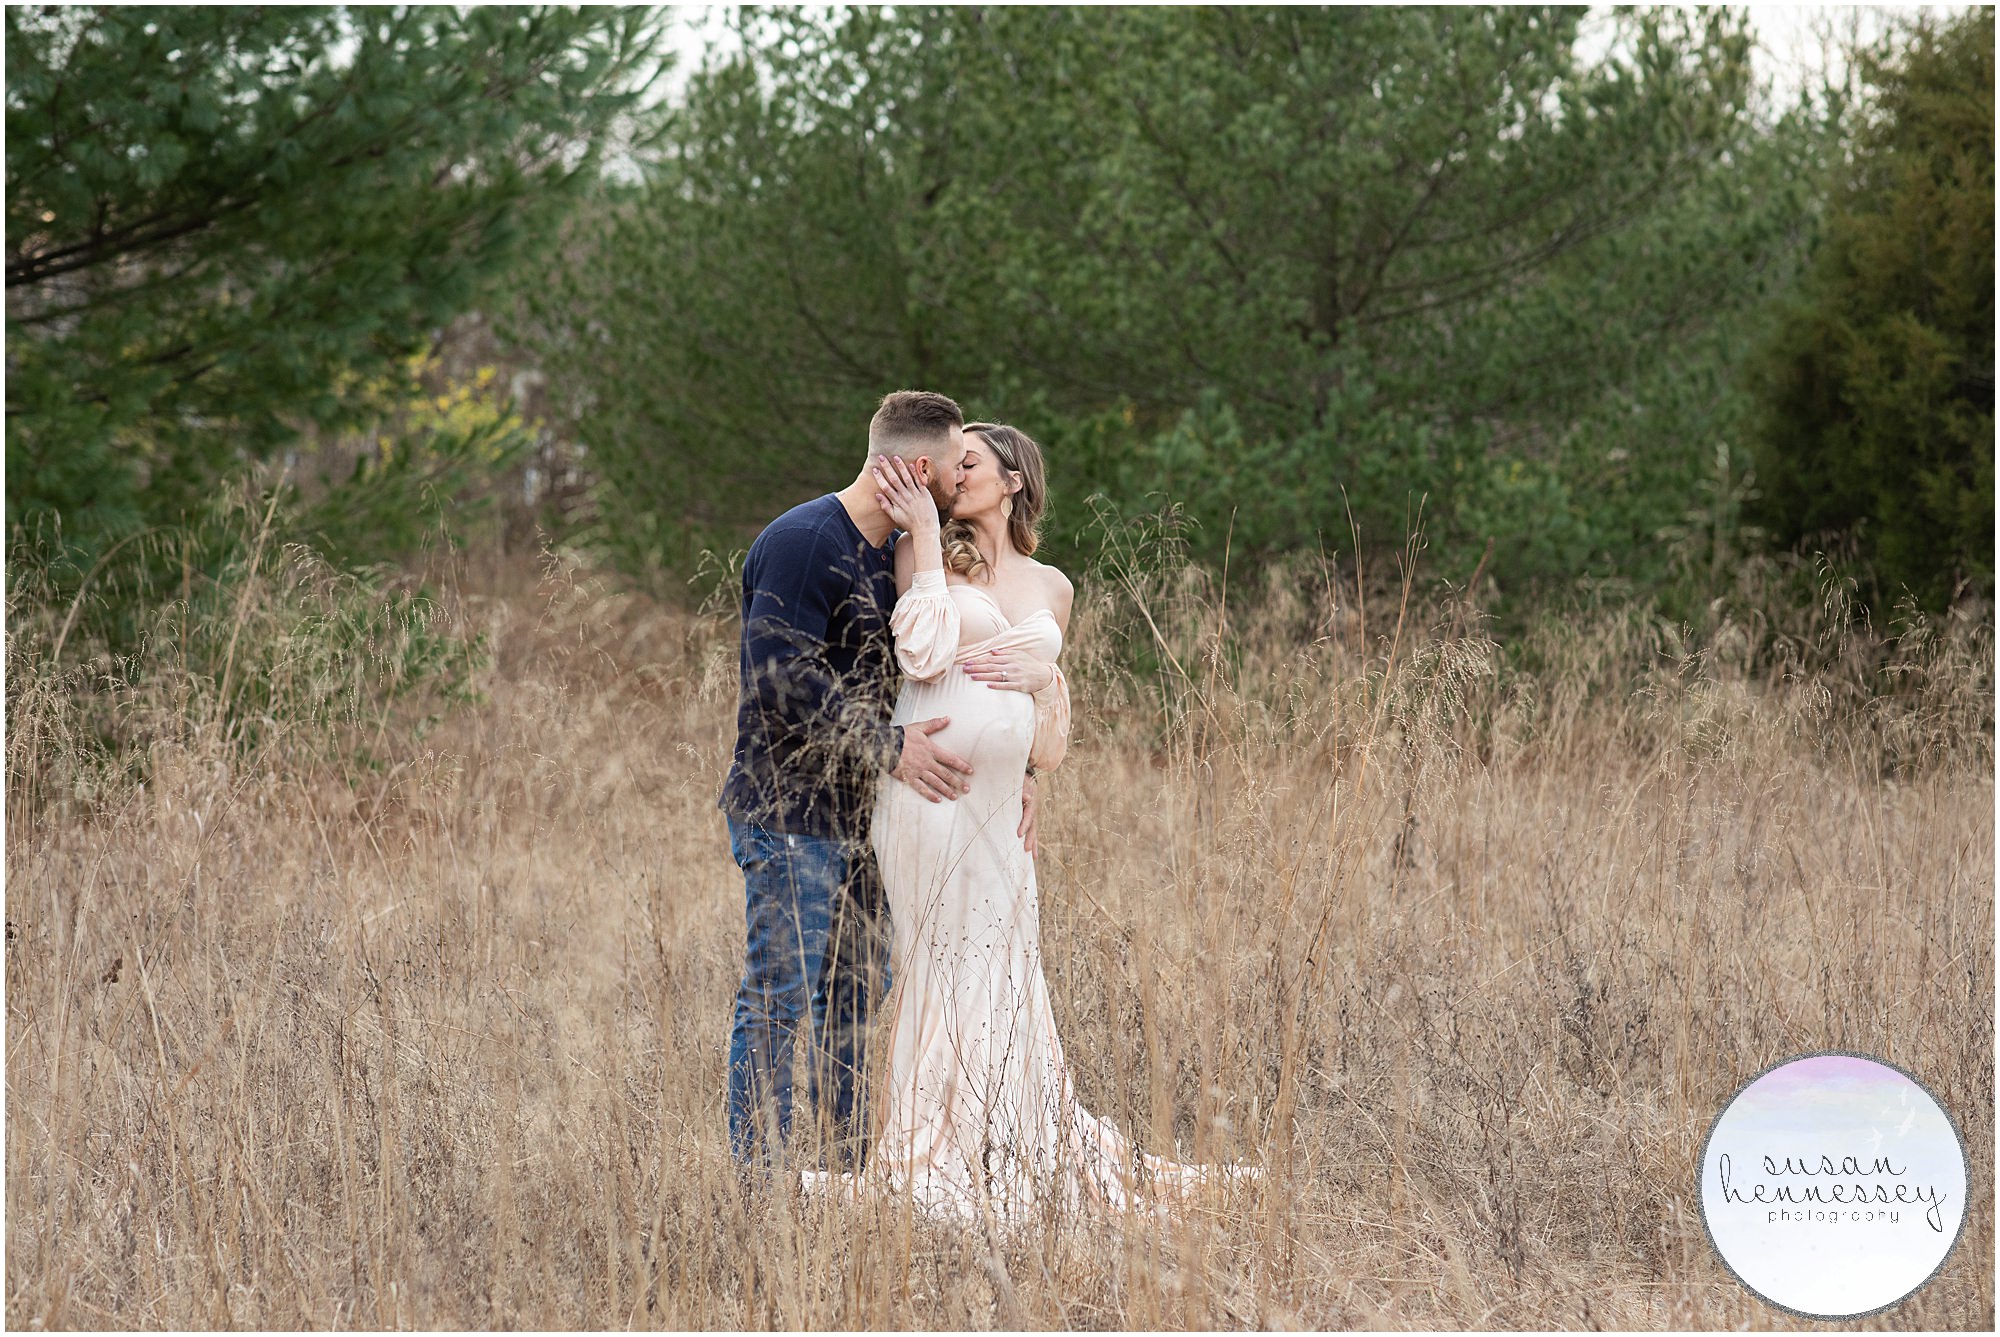 Moorestown Maternity Photographer, Susan Hennessey Photography